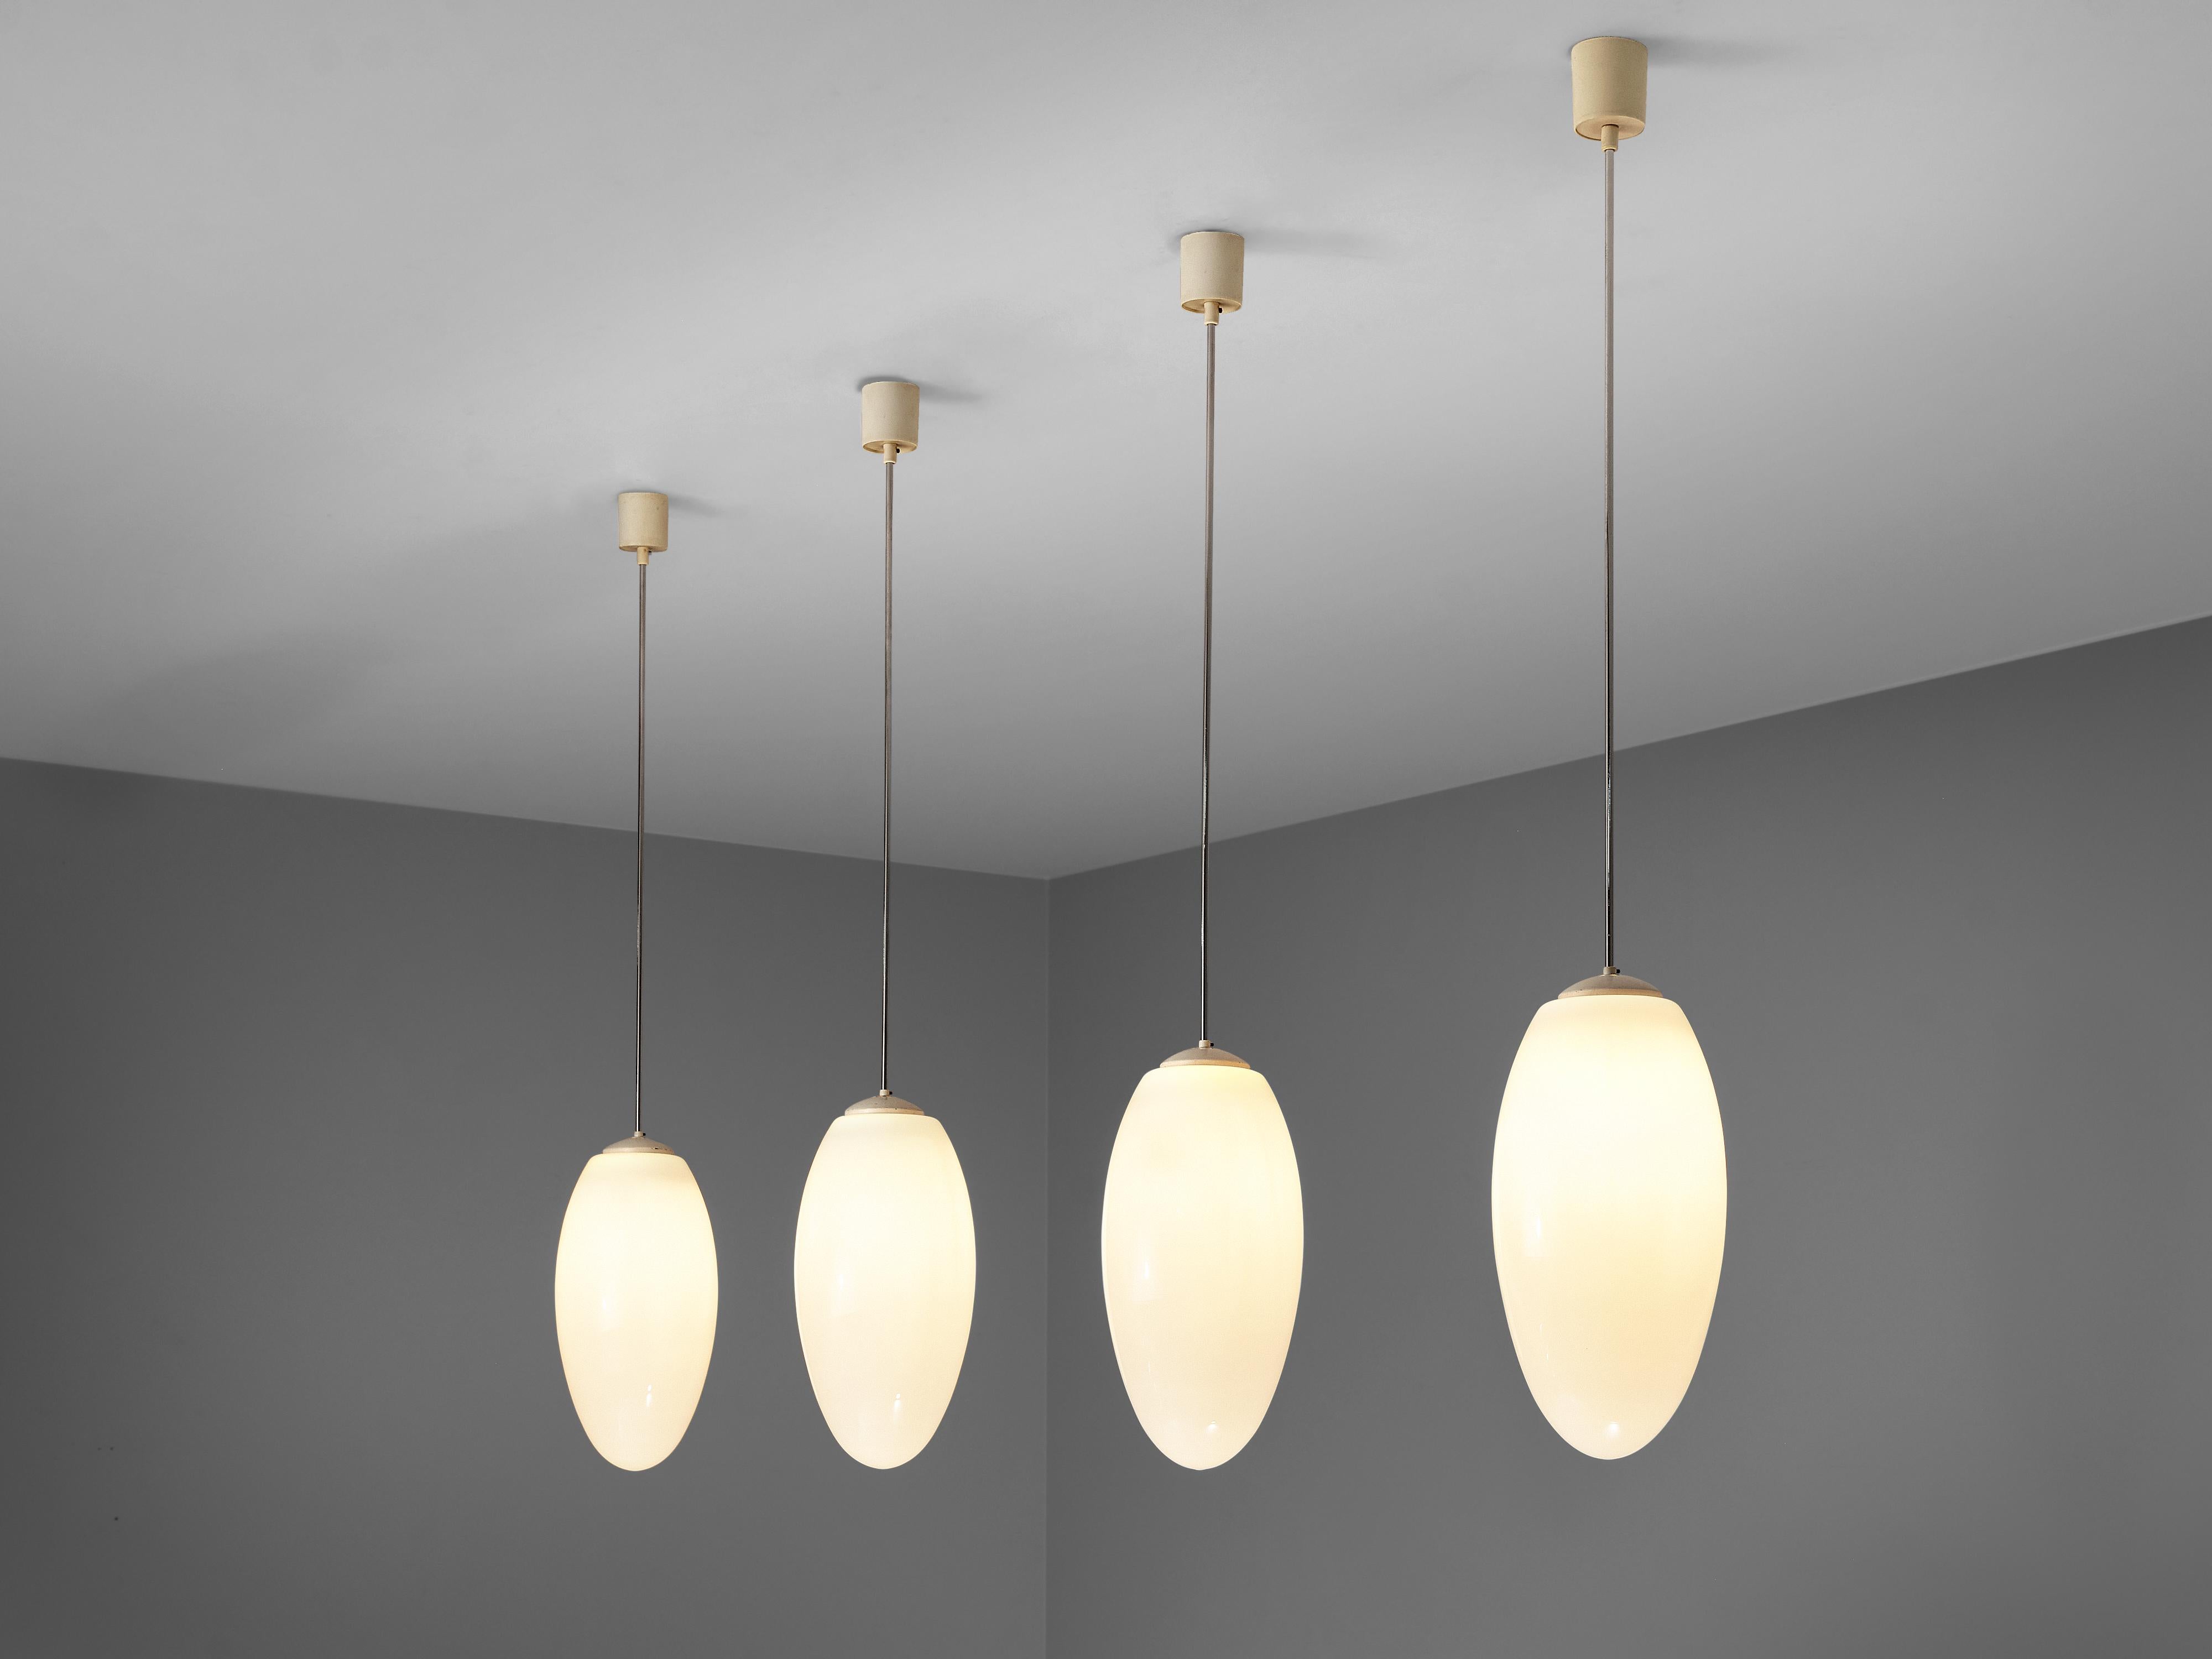 Pendant lamps, metal, opaline glass, plastic, Europe, 1970s

Minimalist pendant lamps with drop-shaped glass shade. The lamps hang on metal stems that end in a cylindric ceiling fixture. The well-balanced, elegant shape of the lamp surrounds the